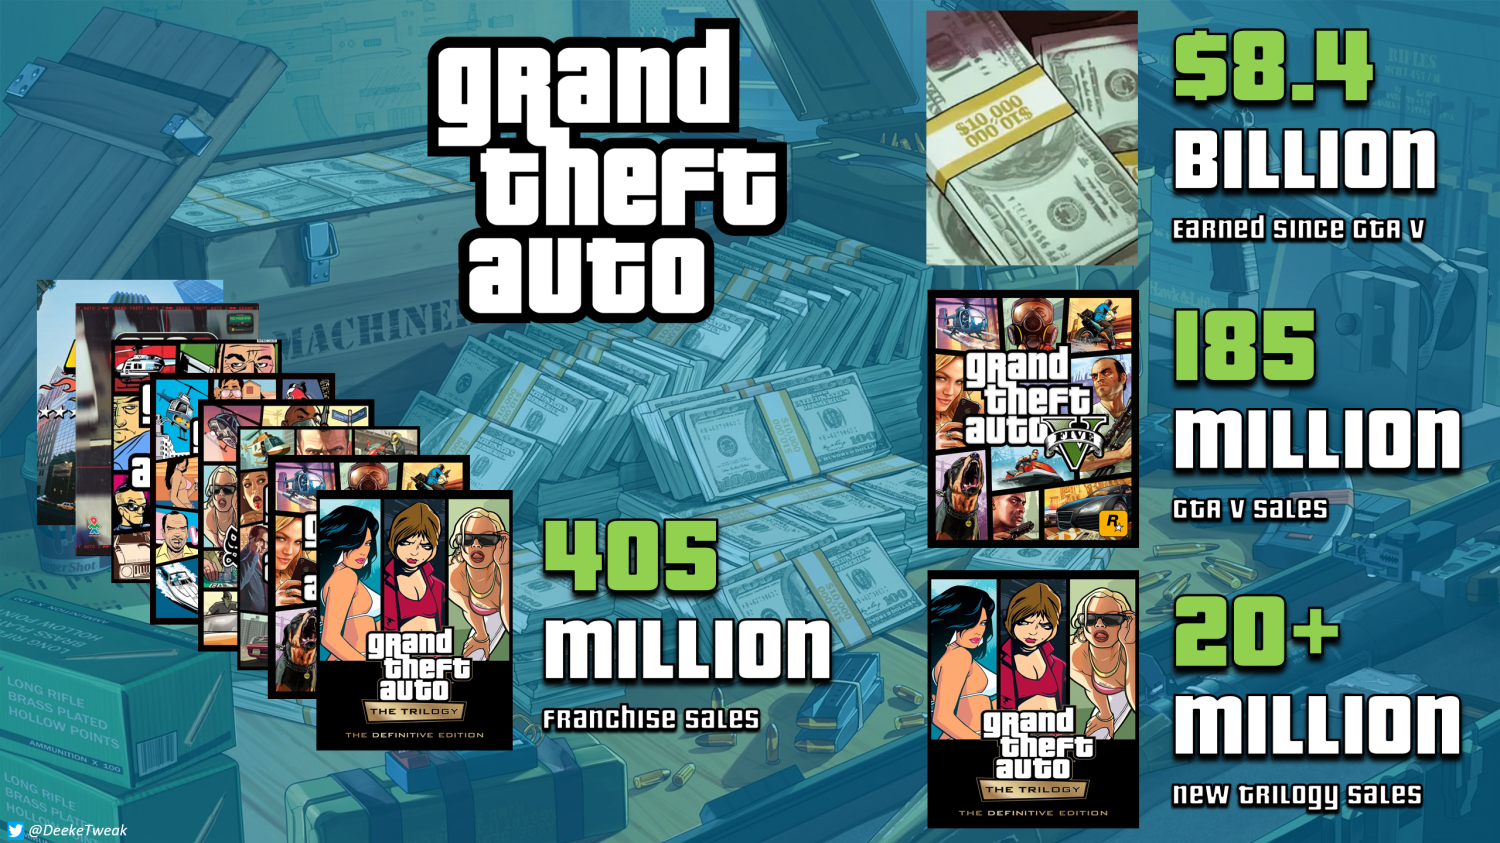 Video game 'Grand Theft Auto' makes a return after ten years